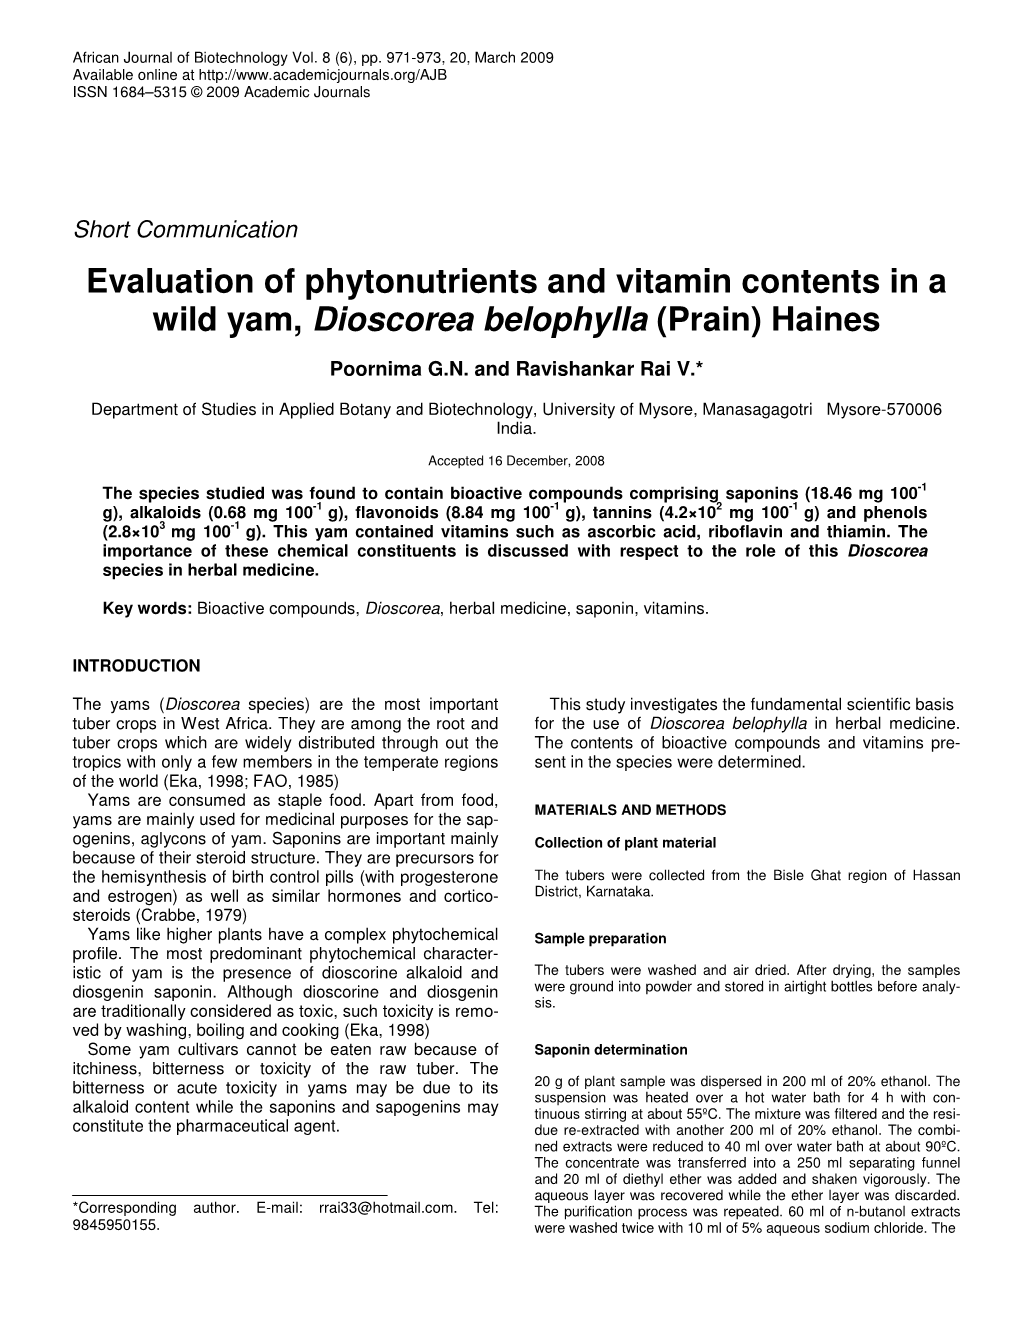 Evaluation of Phytonutrients and Vitamin Contents in a Wild Yam, Dioscorea Belophylla (Prain) Haines